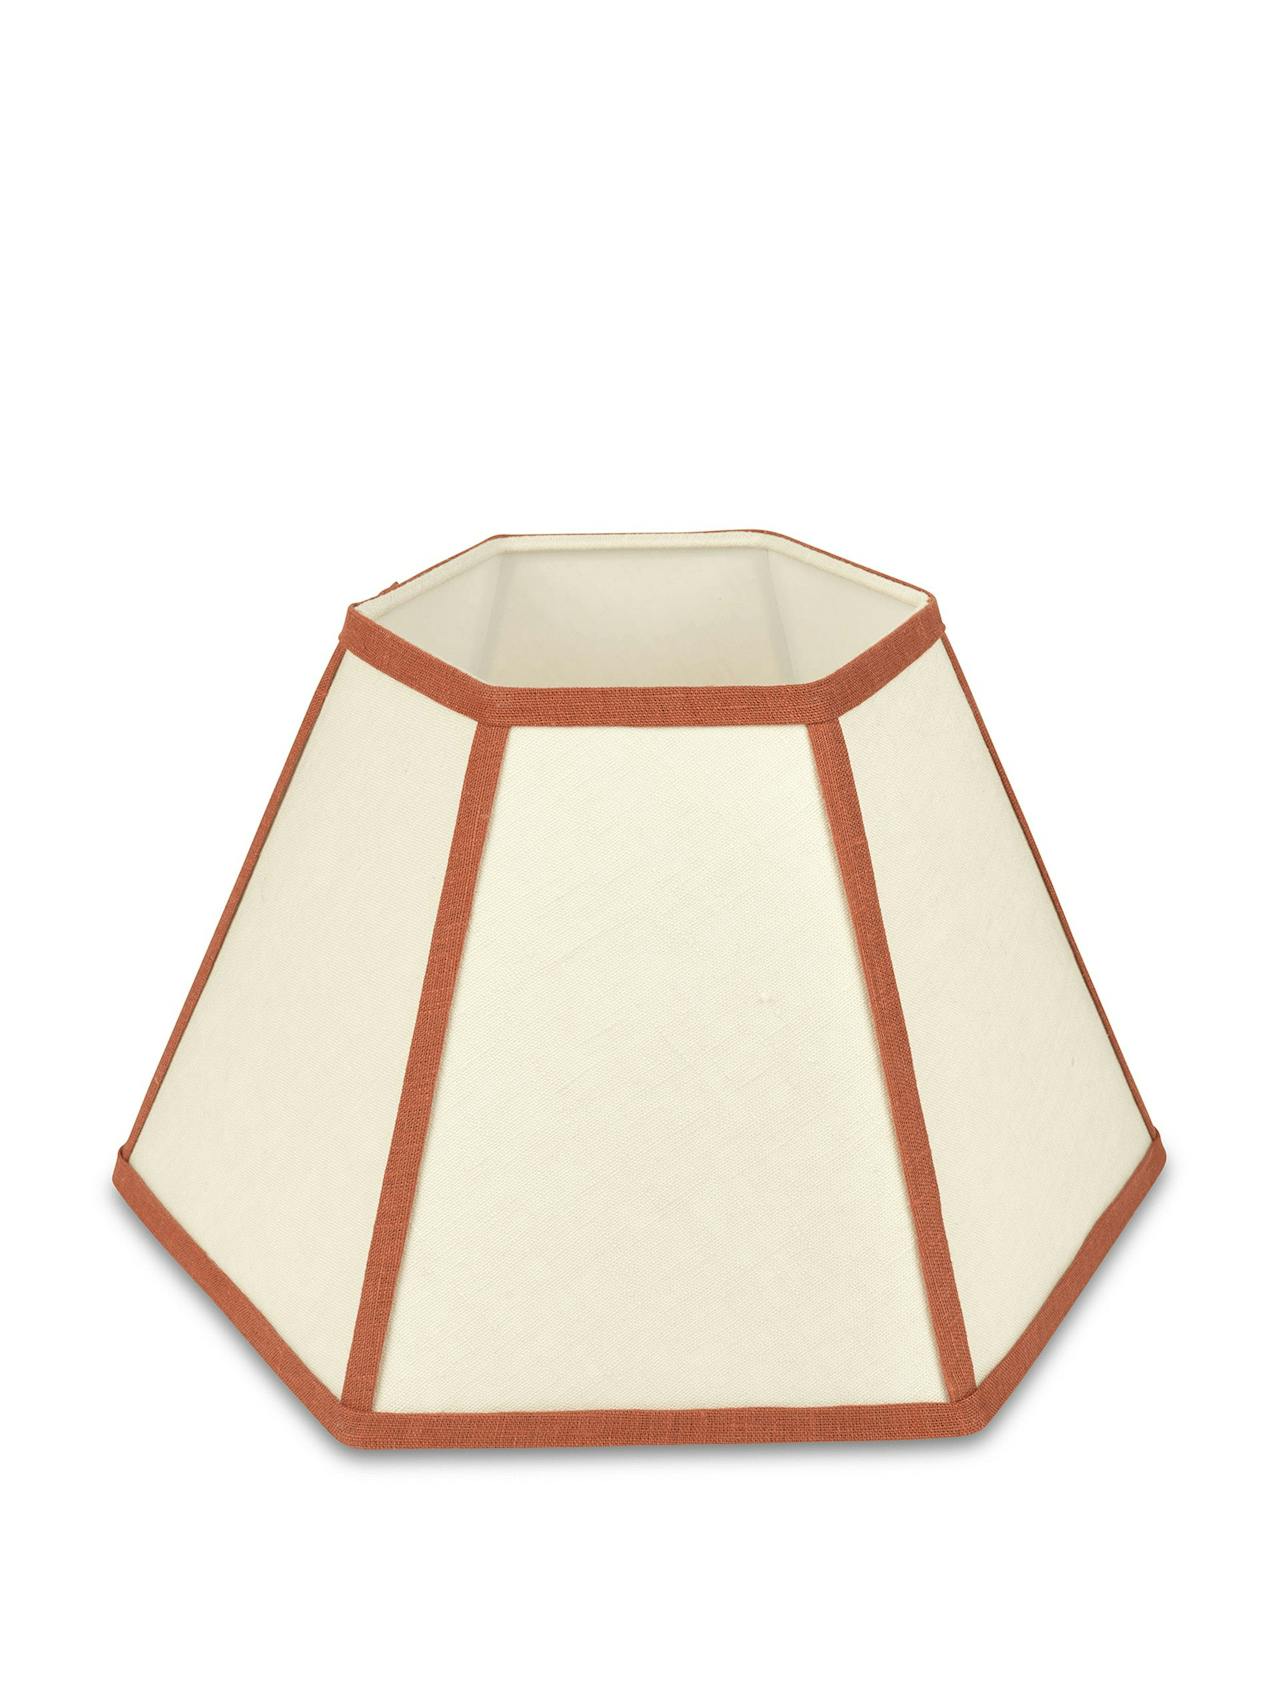 Hexagonal lampshade in oatmeal with contrast trim